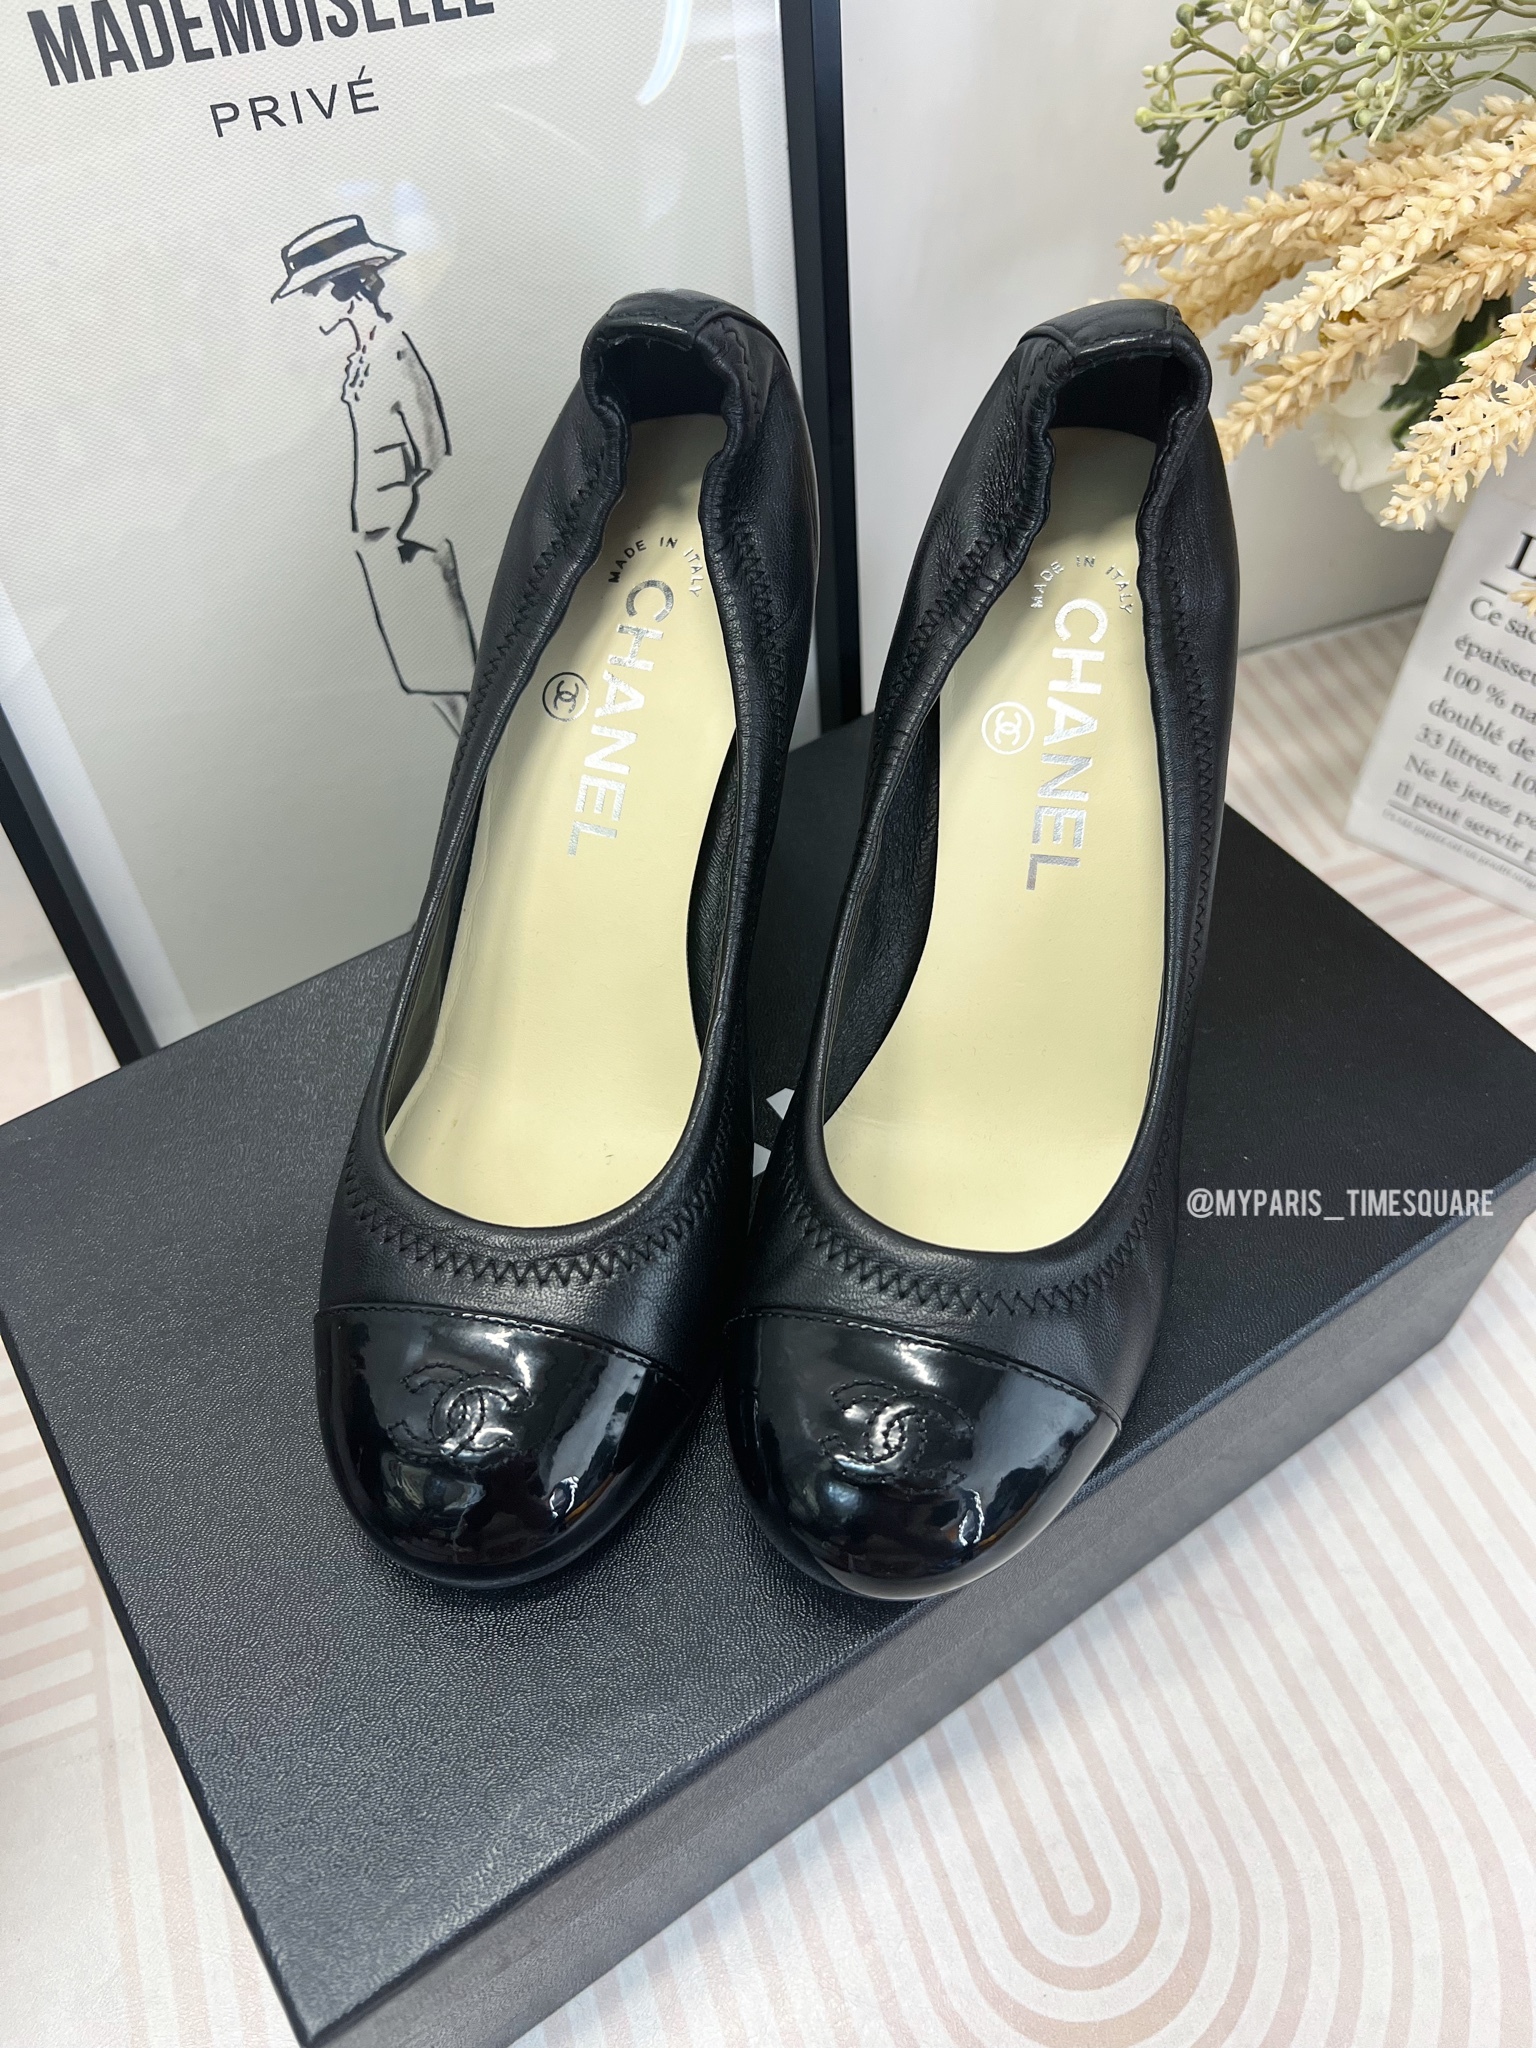 Chanel Ballet Flats Review Are They Worth It  Ballerina Gallery